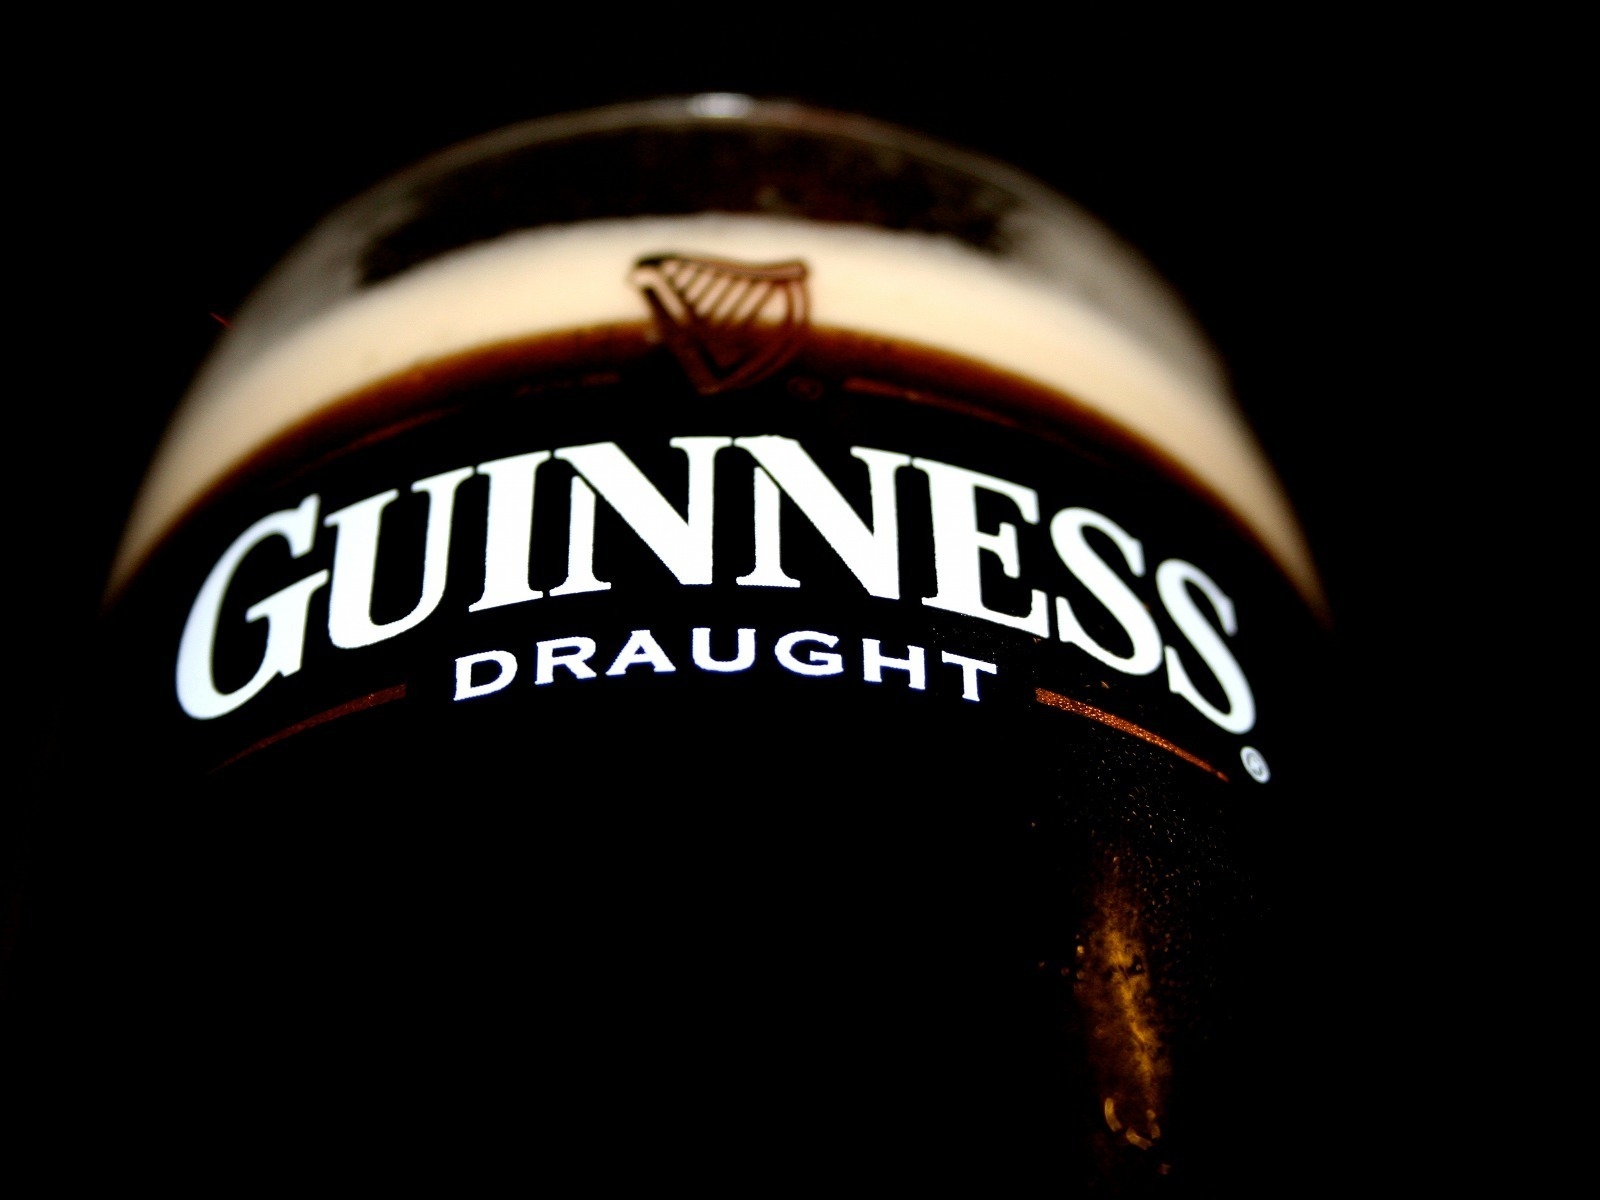 Guiness Beer for 1600 x 1200 resolution